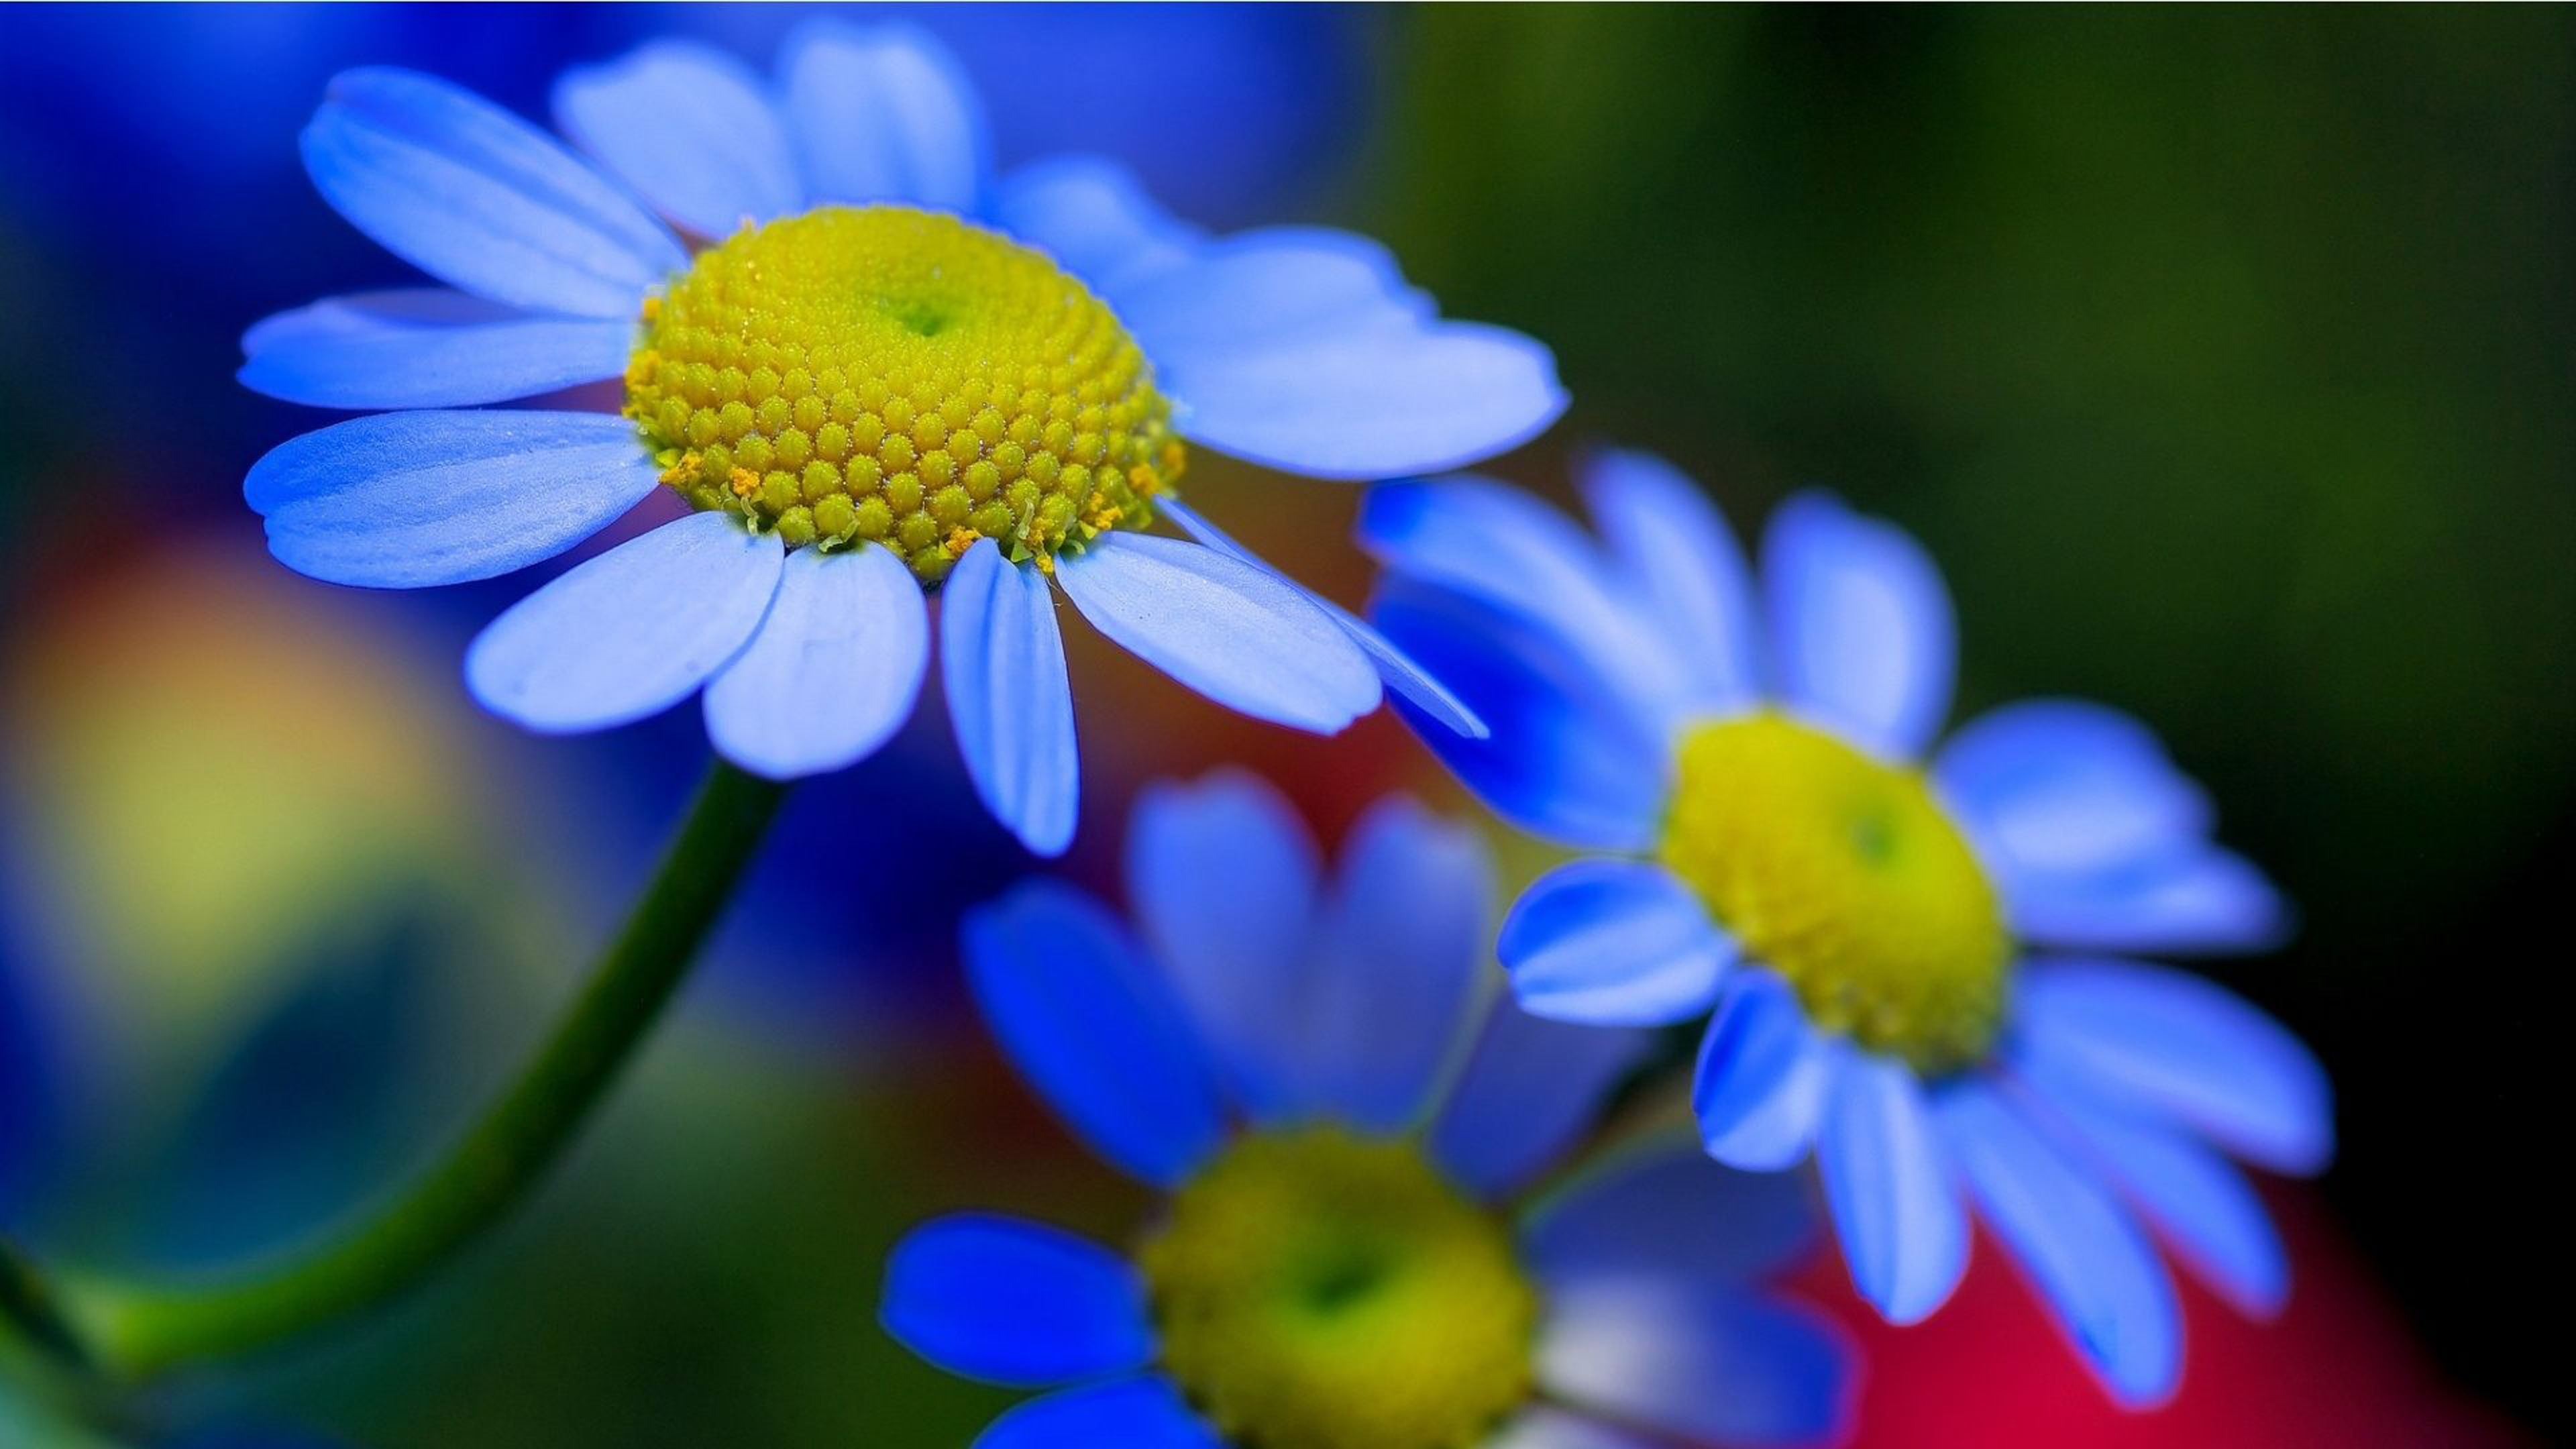 Blue Yellow Flowers Petals Nature Hd Wallpaper Download For Mobile